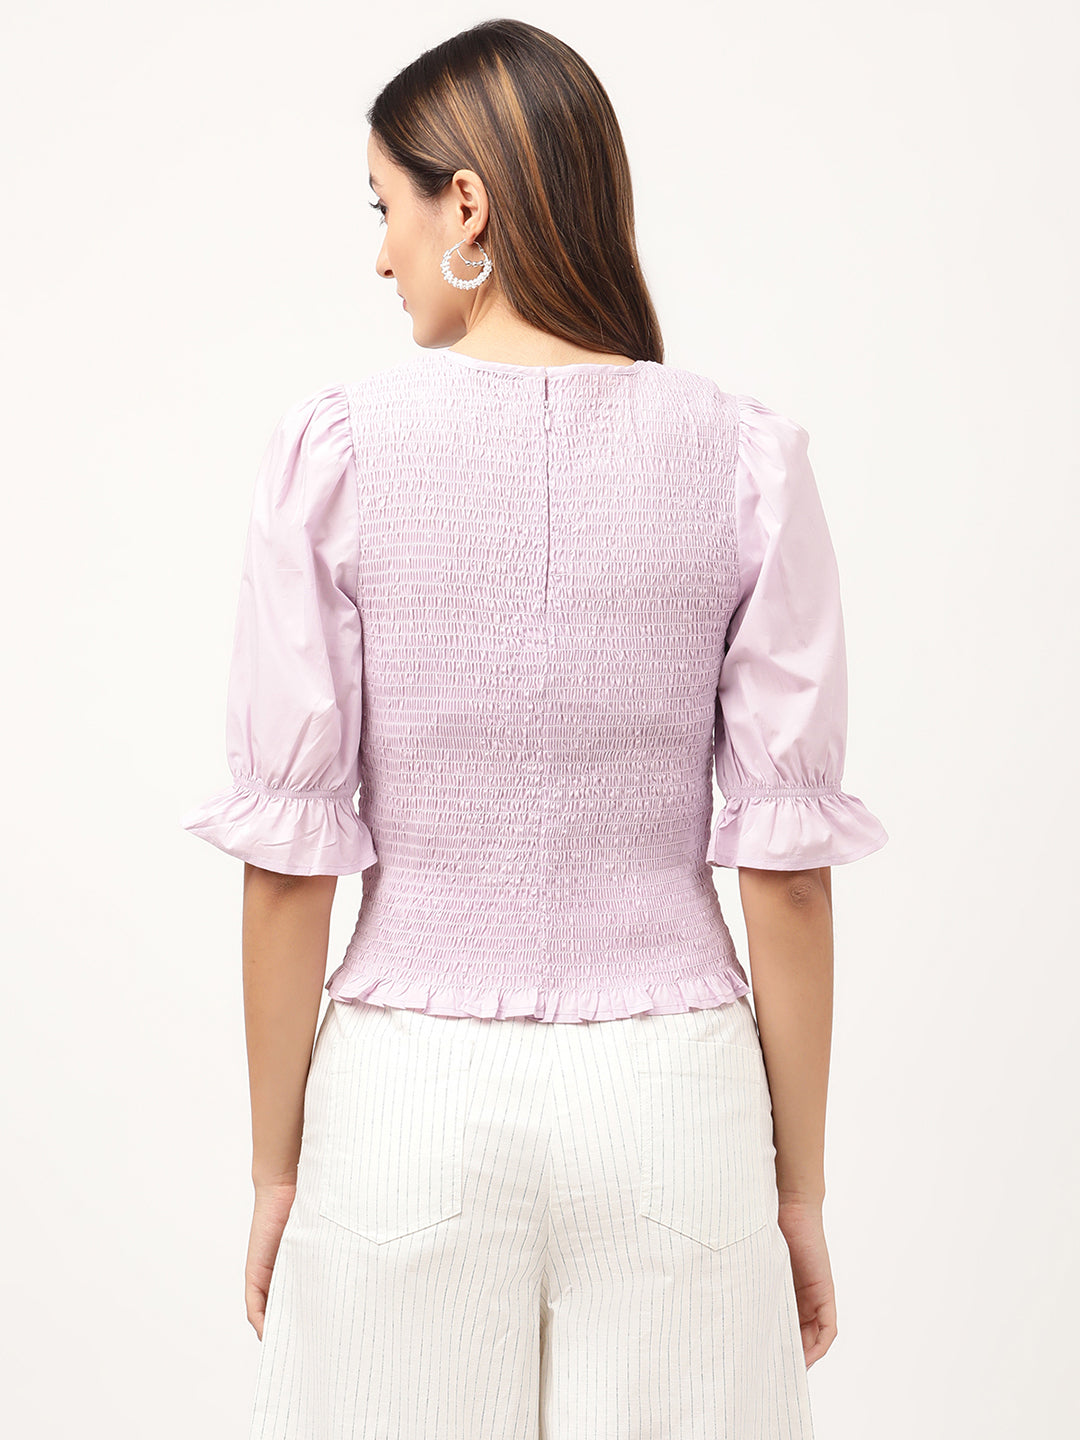 Elle Women Lilac Solid Round Neck Top